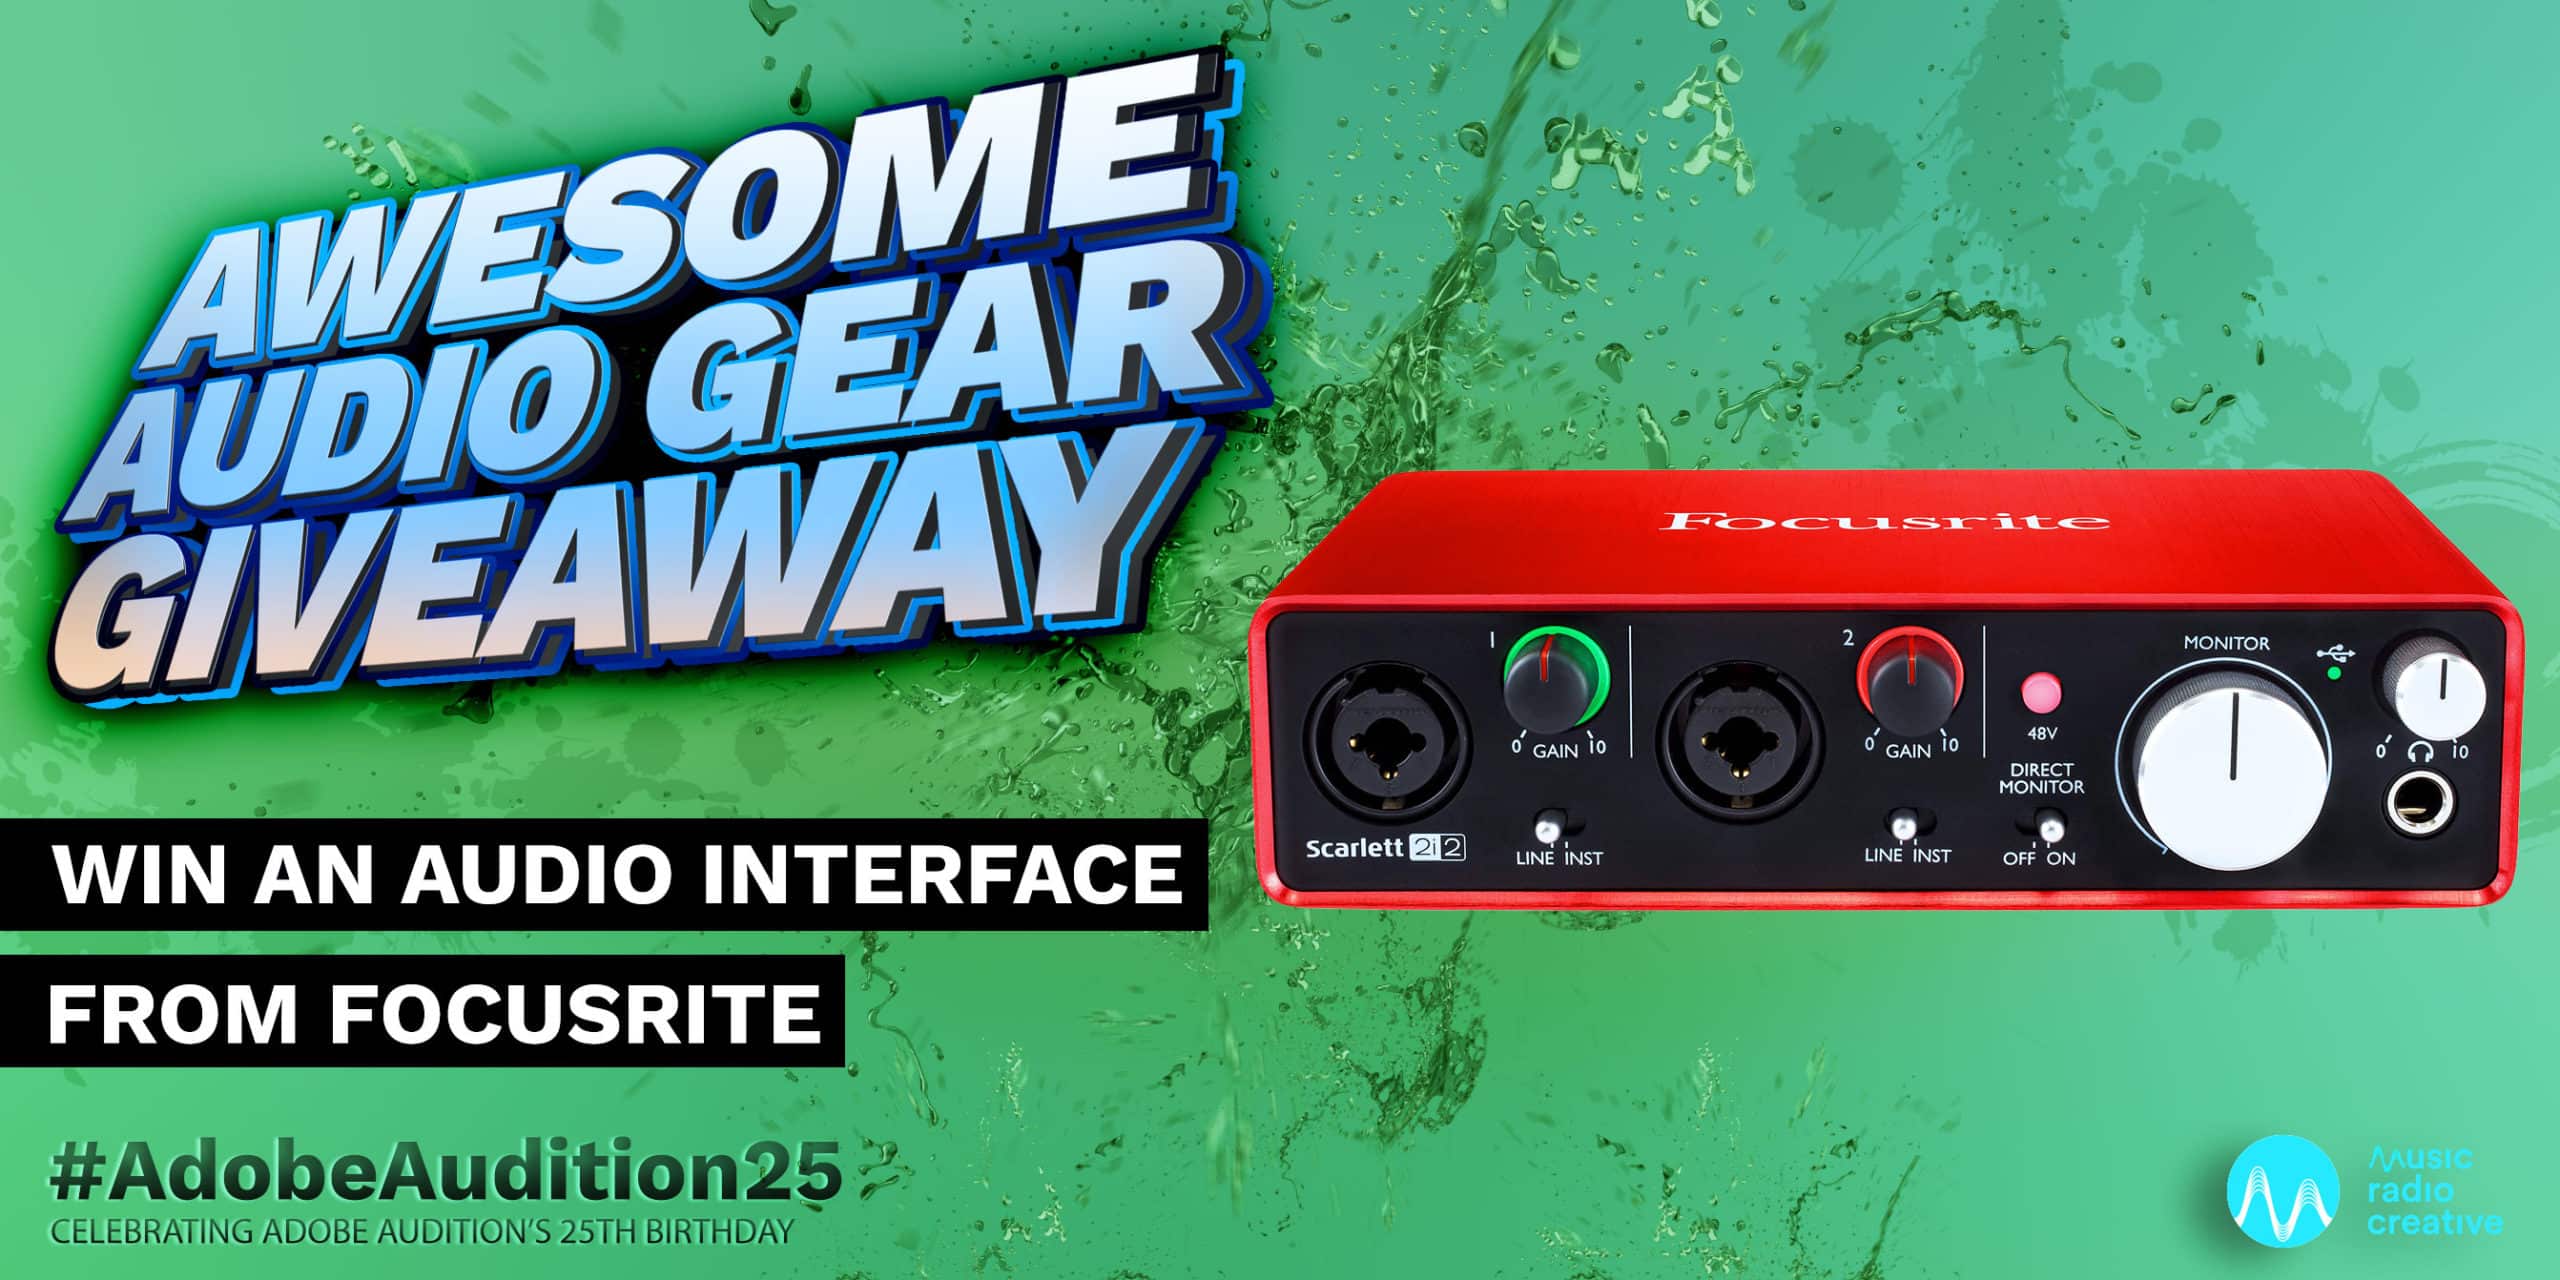 Win an Audio Interface from Focusrite Awesome Audio Gear Giveaway  Music Radio Creative